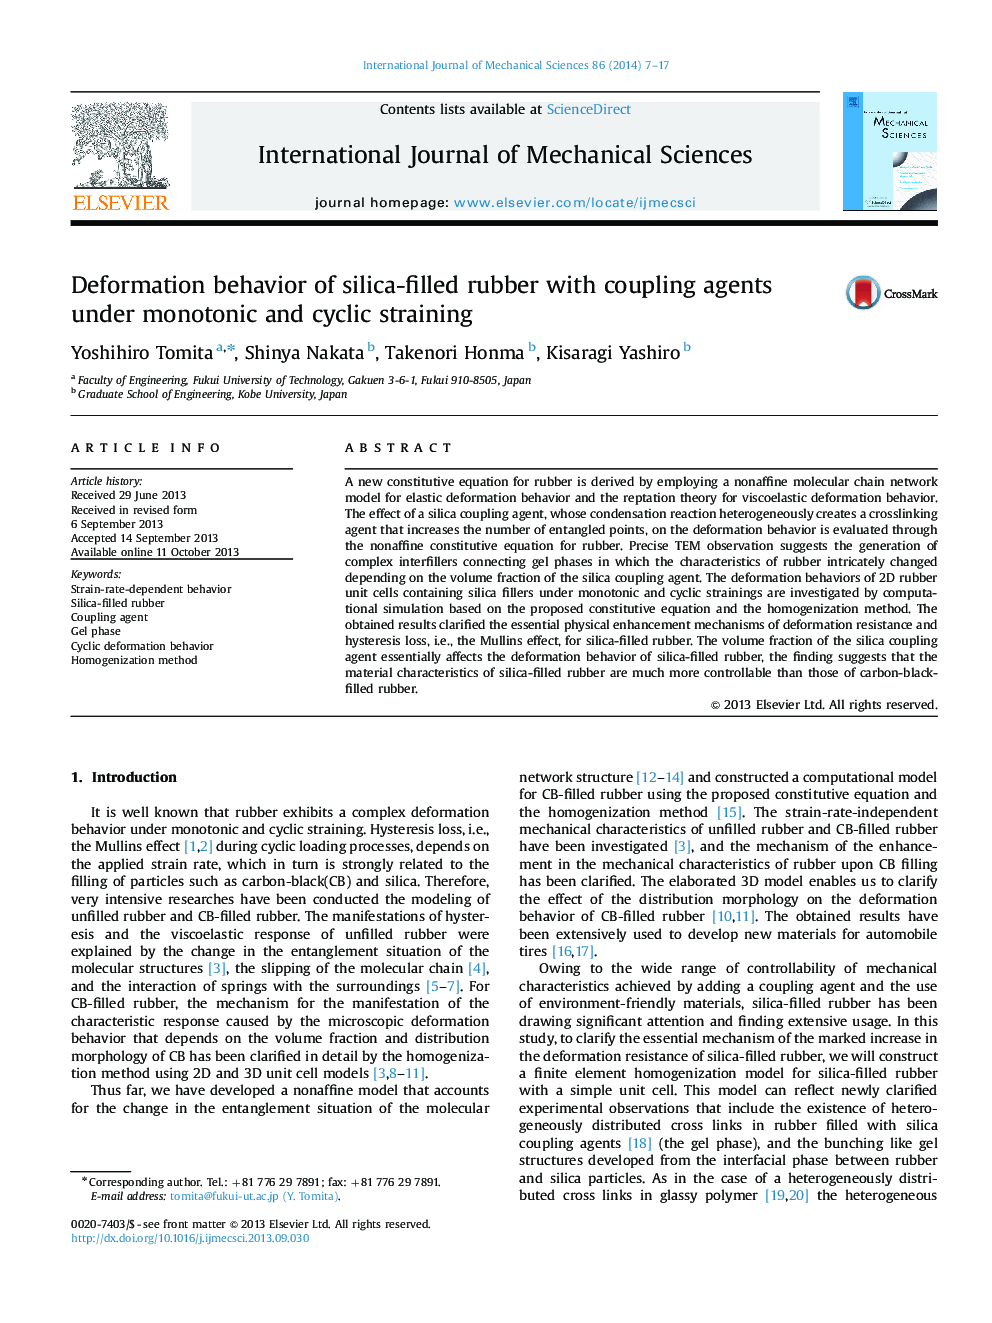 Deformation behavior of silica-filled rubber with coupling agents under monotonic and cyclic straining